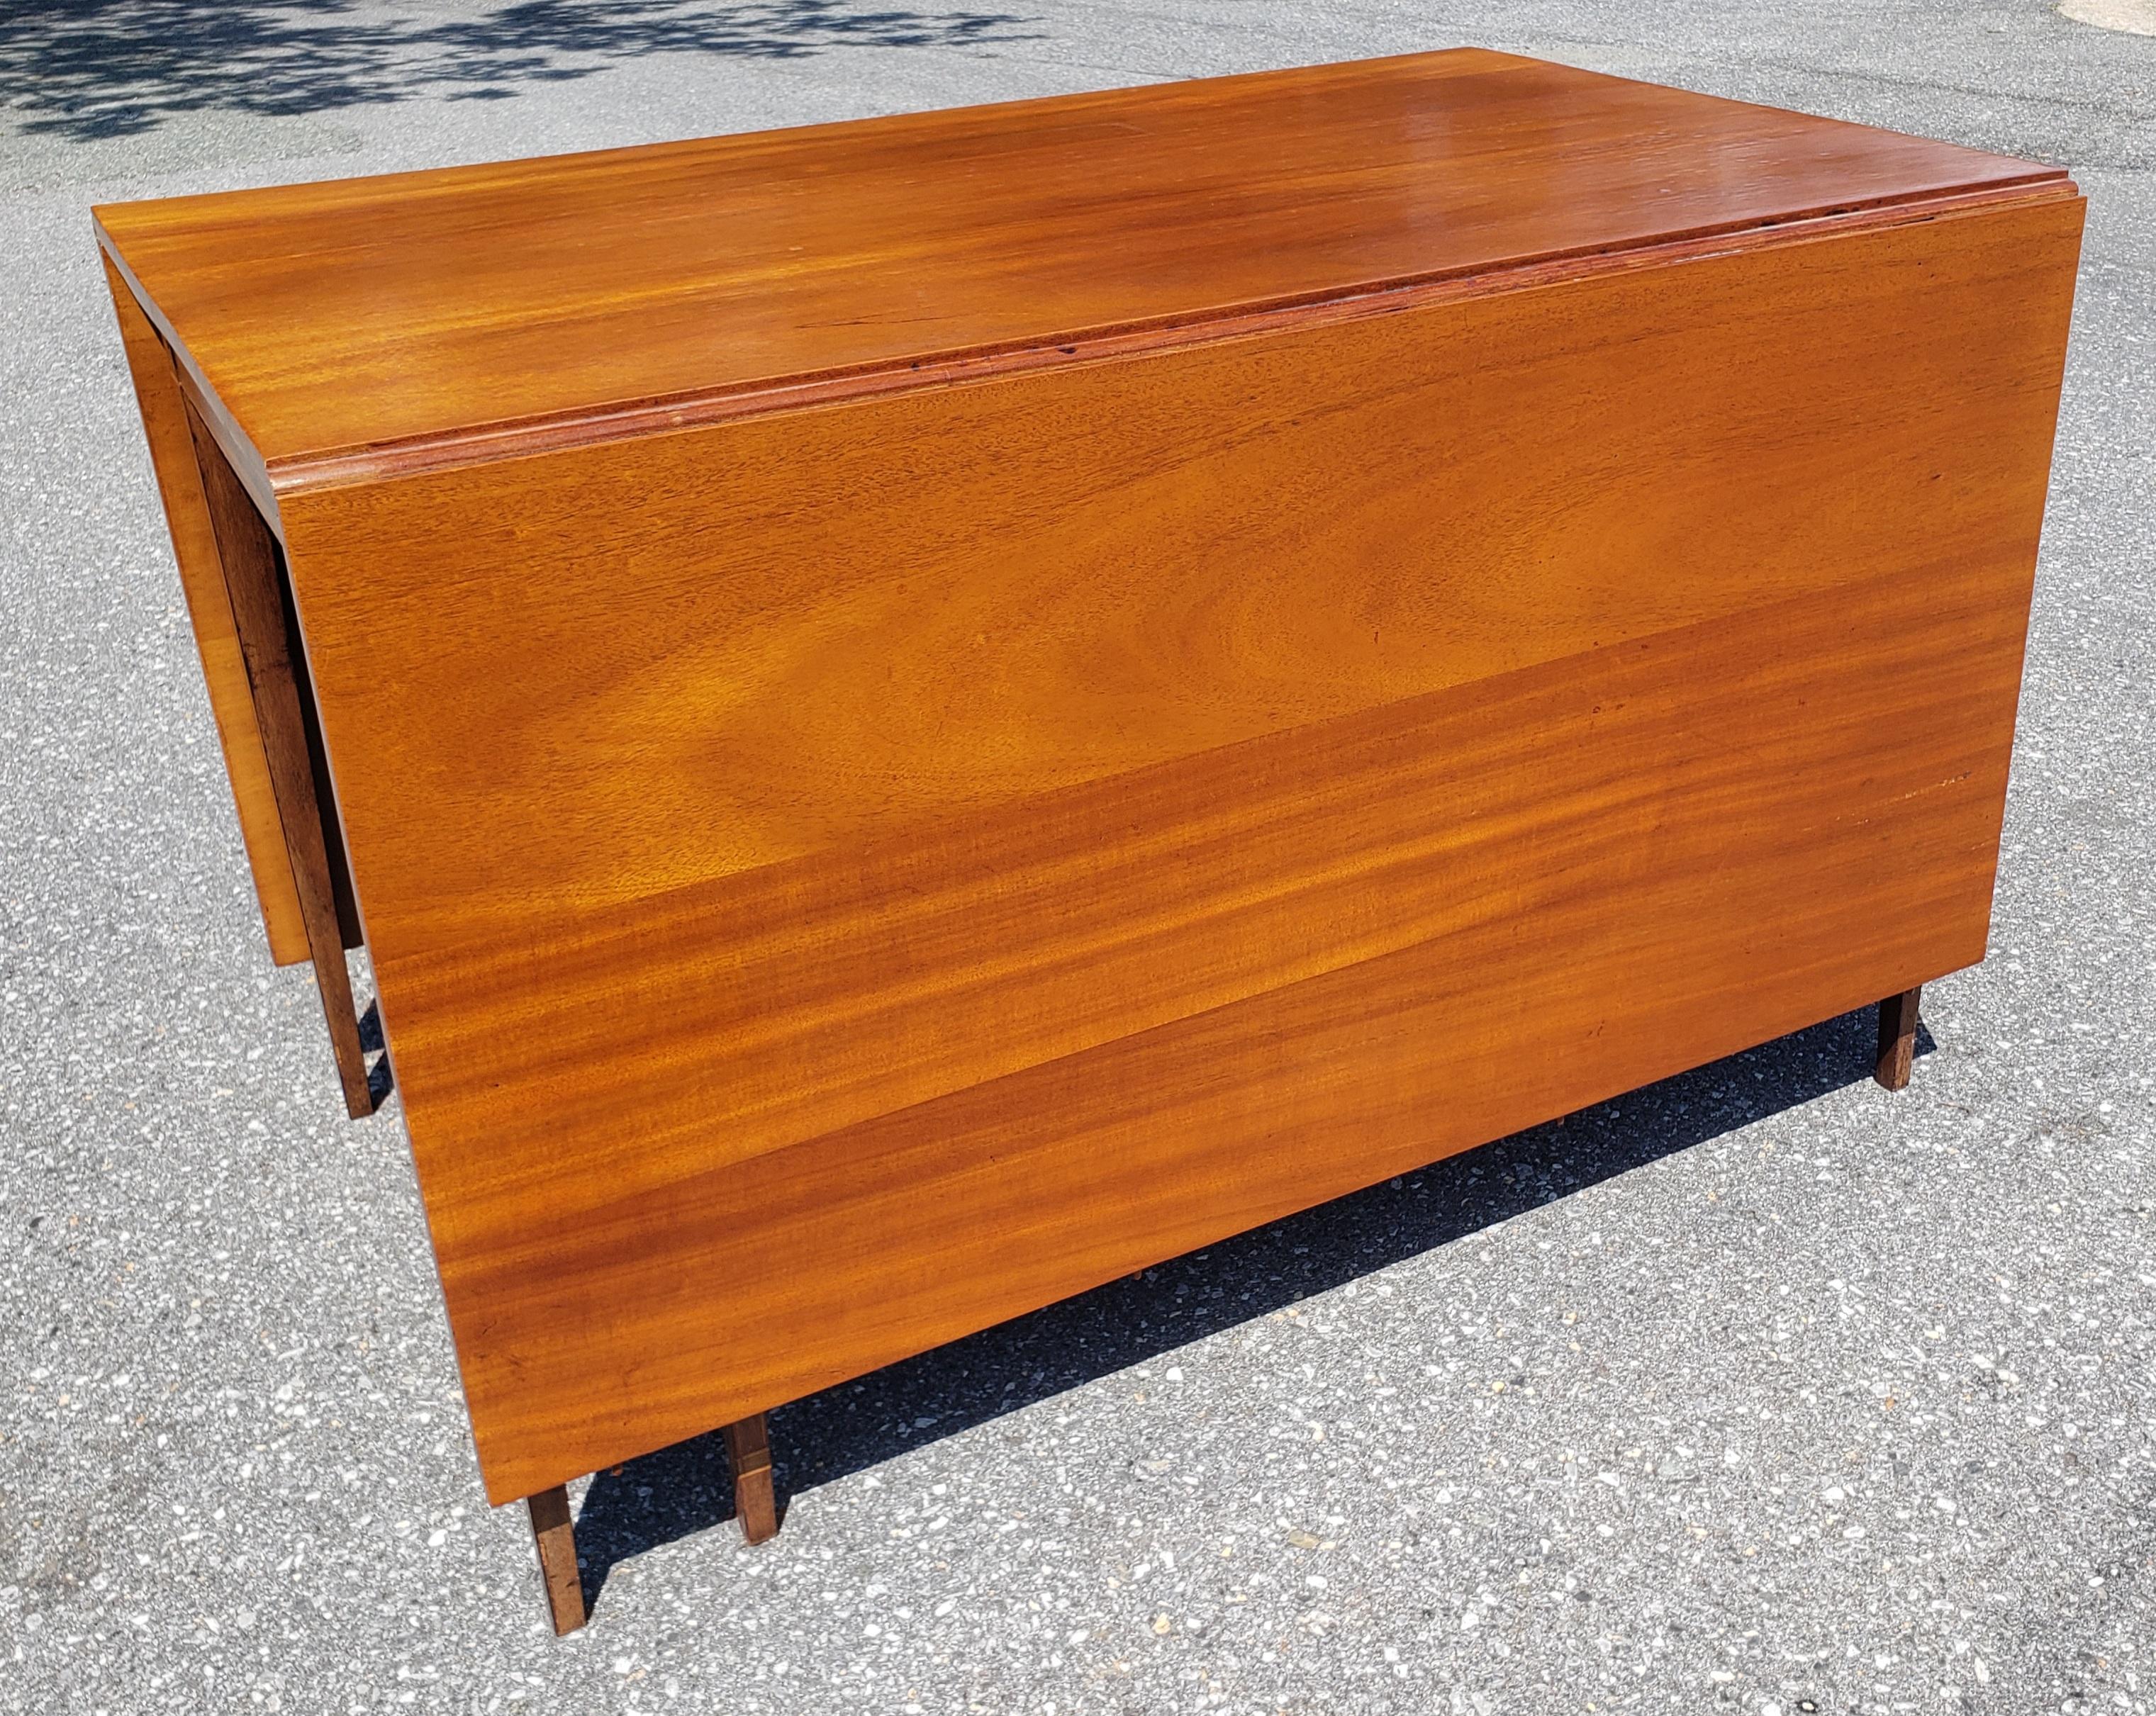 1930s American Federal Inlaid Mahogany 3-Part Banquet Table For Sale 13